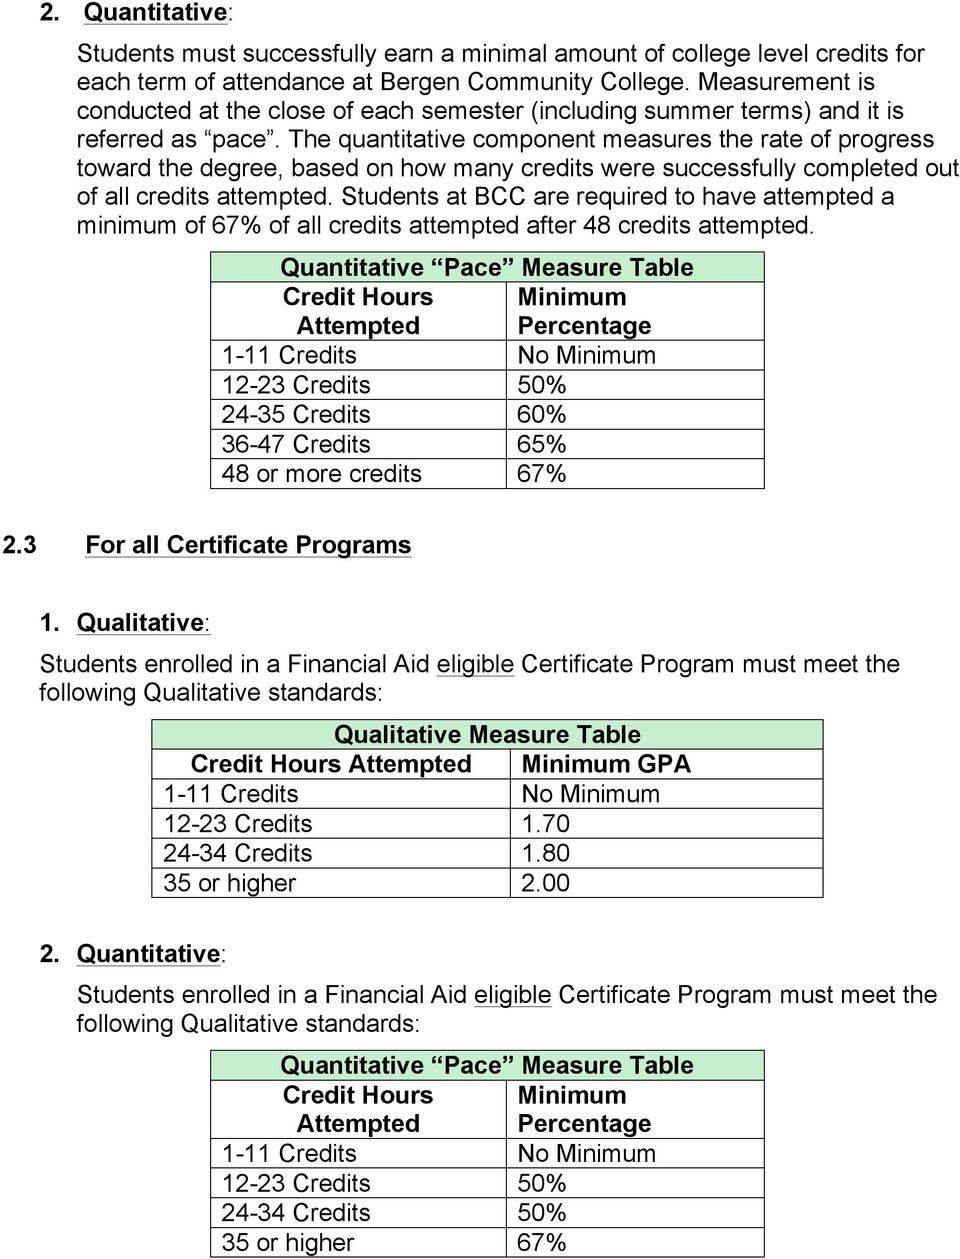 The quantitative component measures the rate of progress toward the degree, based on how many credits were successfully completed out of all credits attempted.